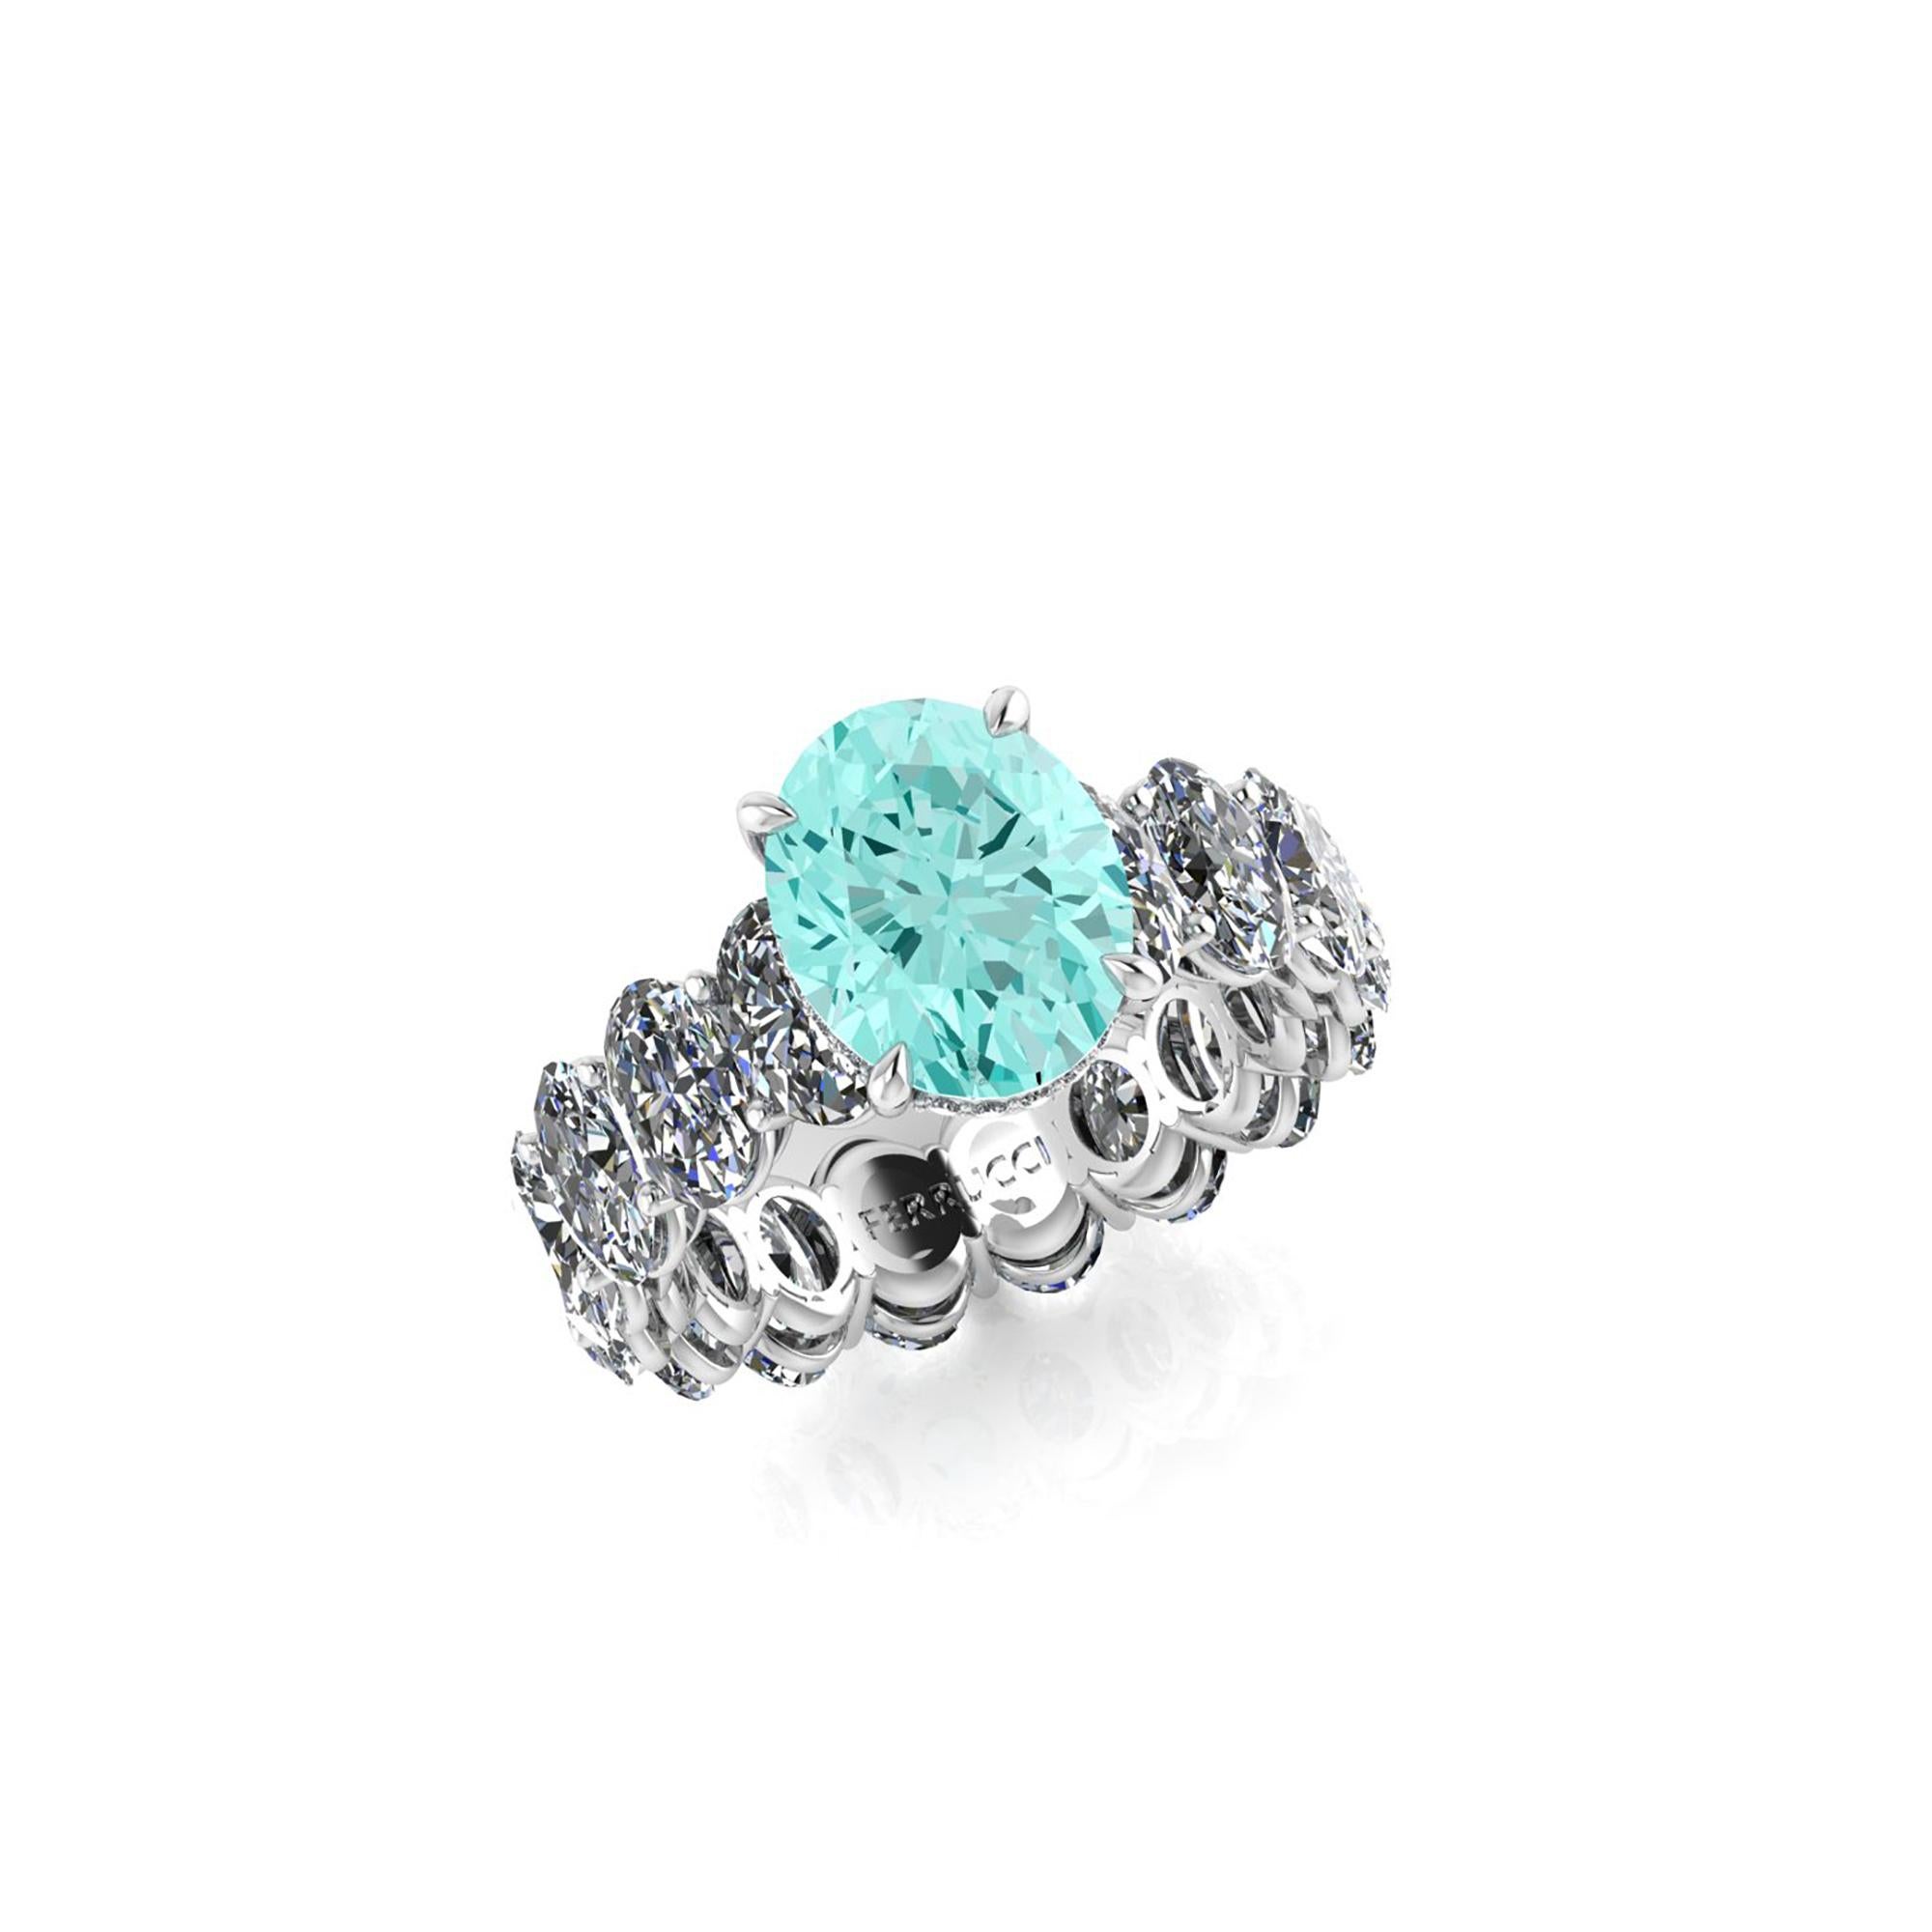 AGL Certified 2.11 Carat African Paraiba Tourmaline, set on a Platinum 950 Oval diamond eternity ring, designed and hand made in New York with the gem adorned by pave of white round diamonds, for a total diamond carat weight of 5.10 carats, color H,